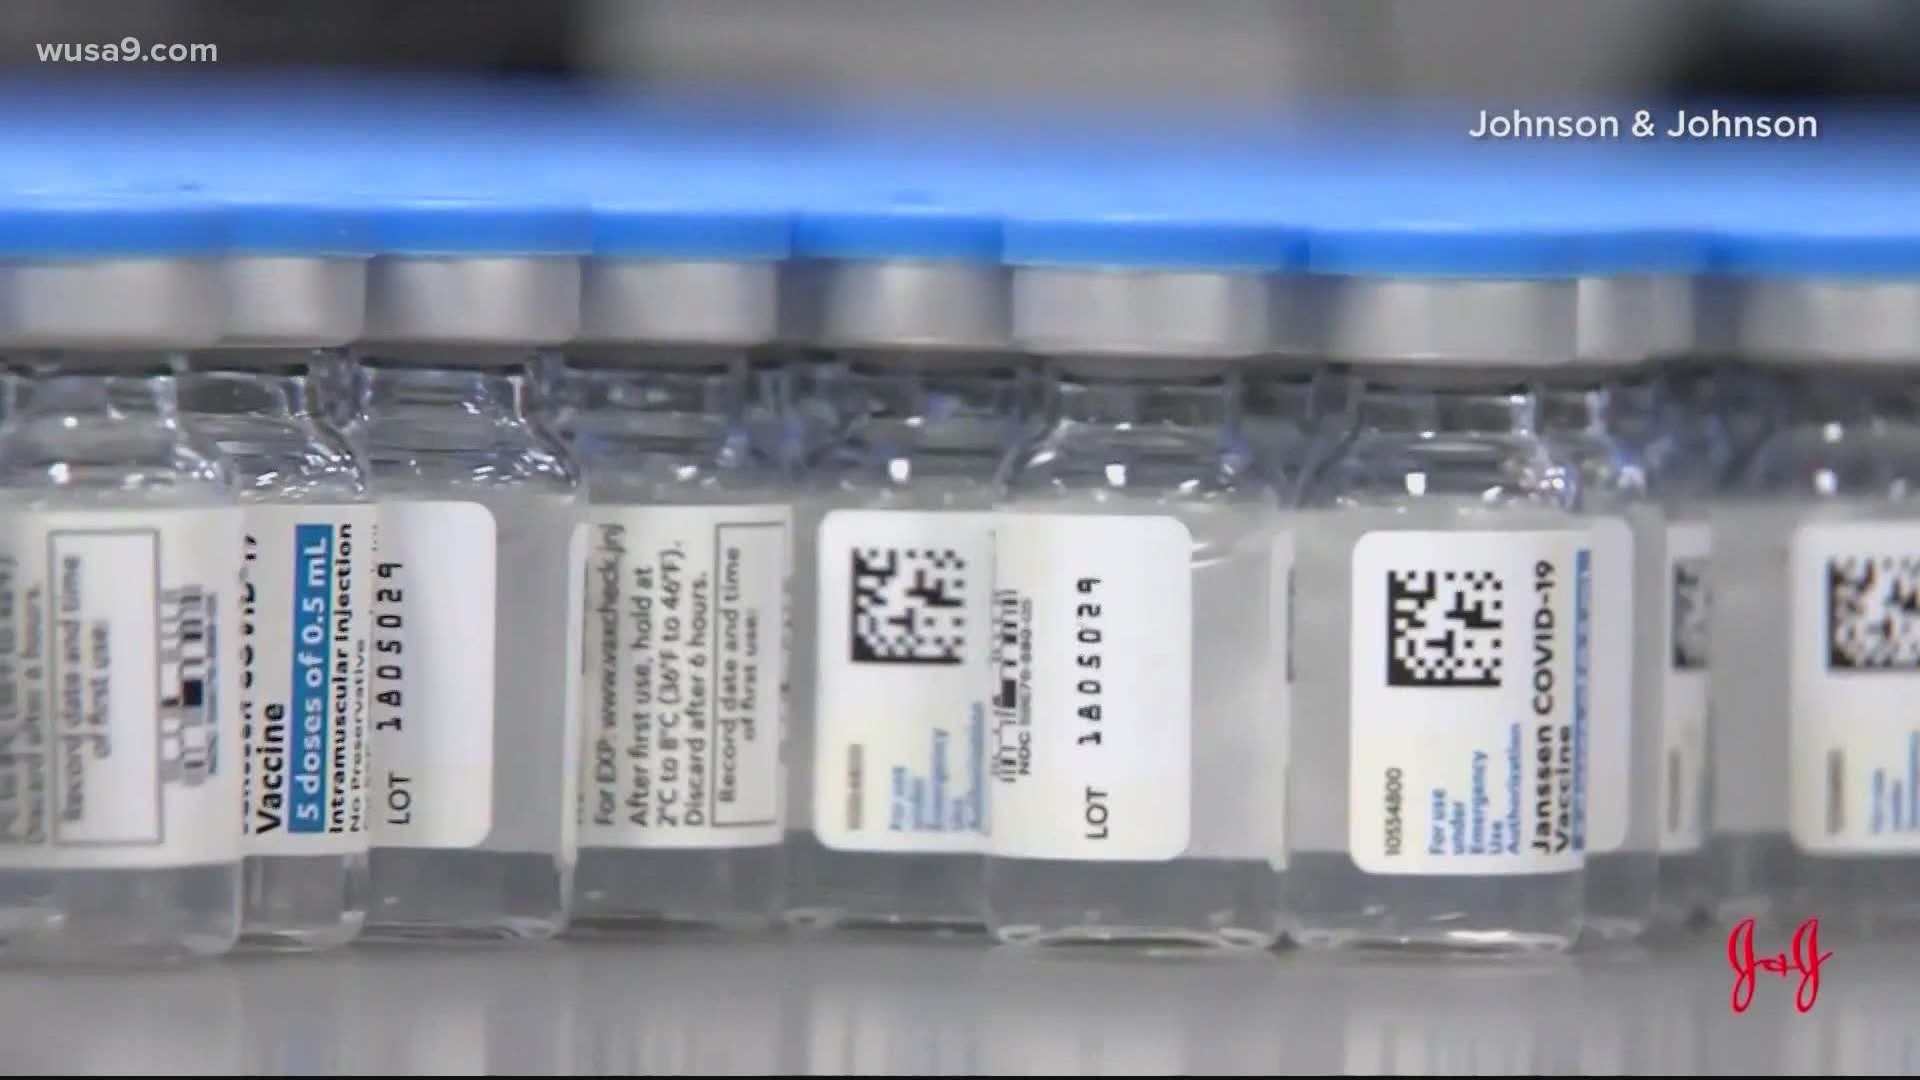 Out of nearly 8 million people vaccinated before the U.S. paused J&J’s shot, officials uncovered 15 cases of a highly unusual kind of blood clot.